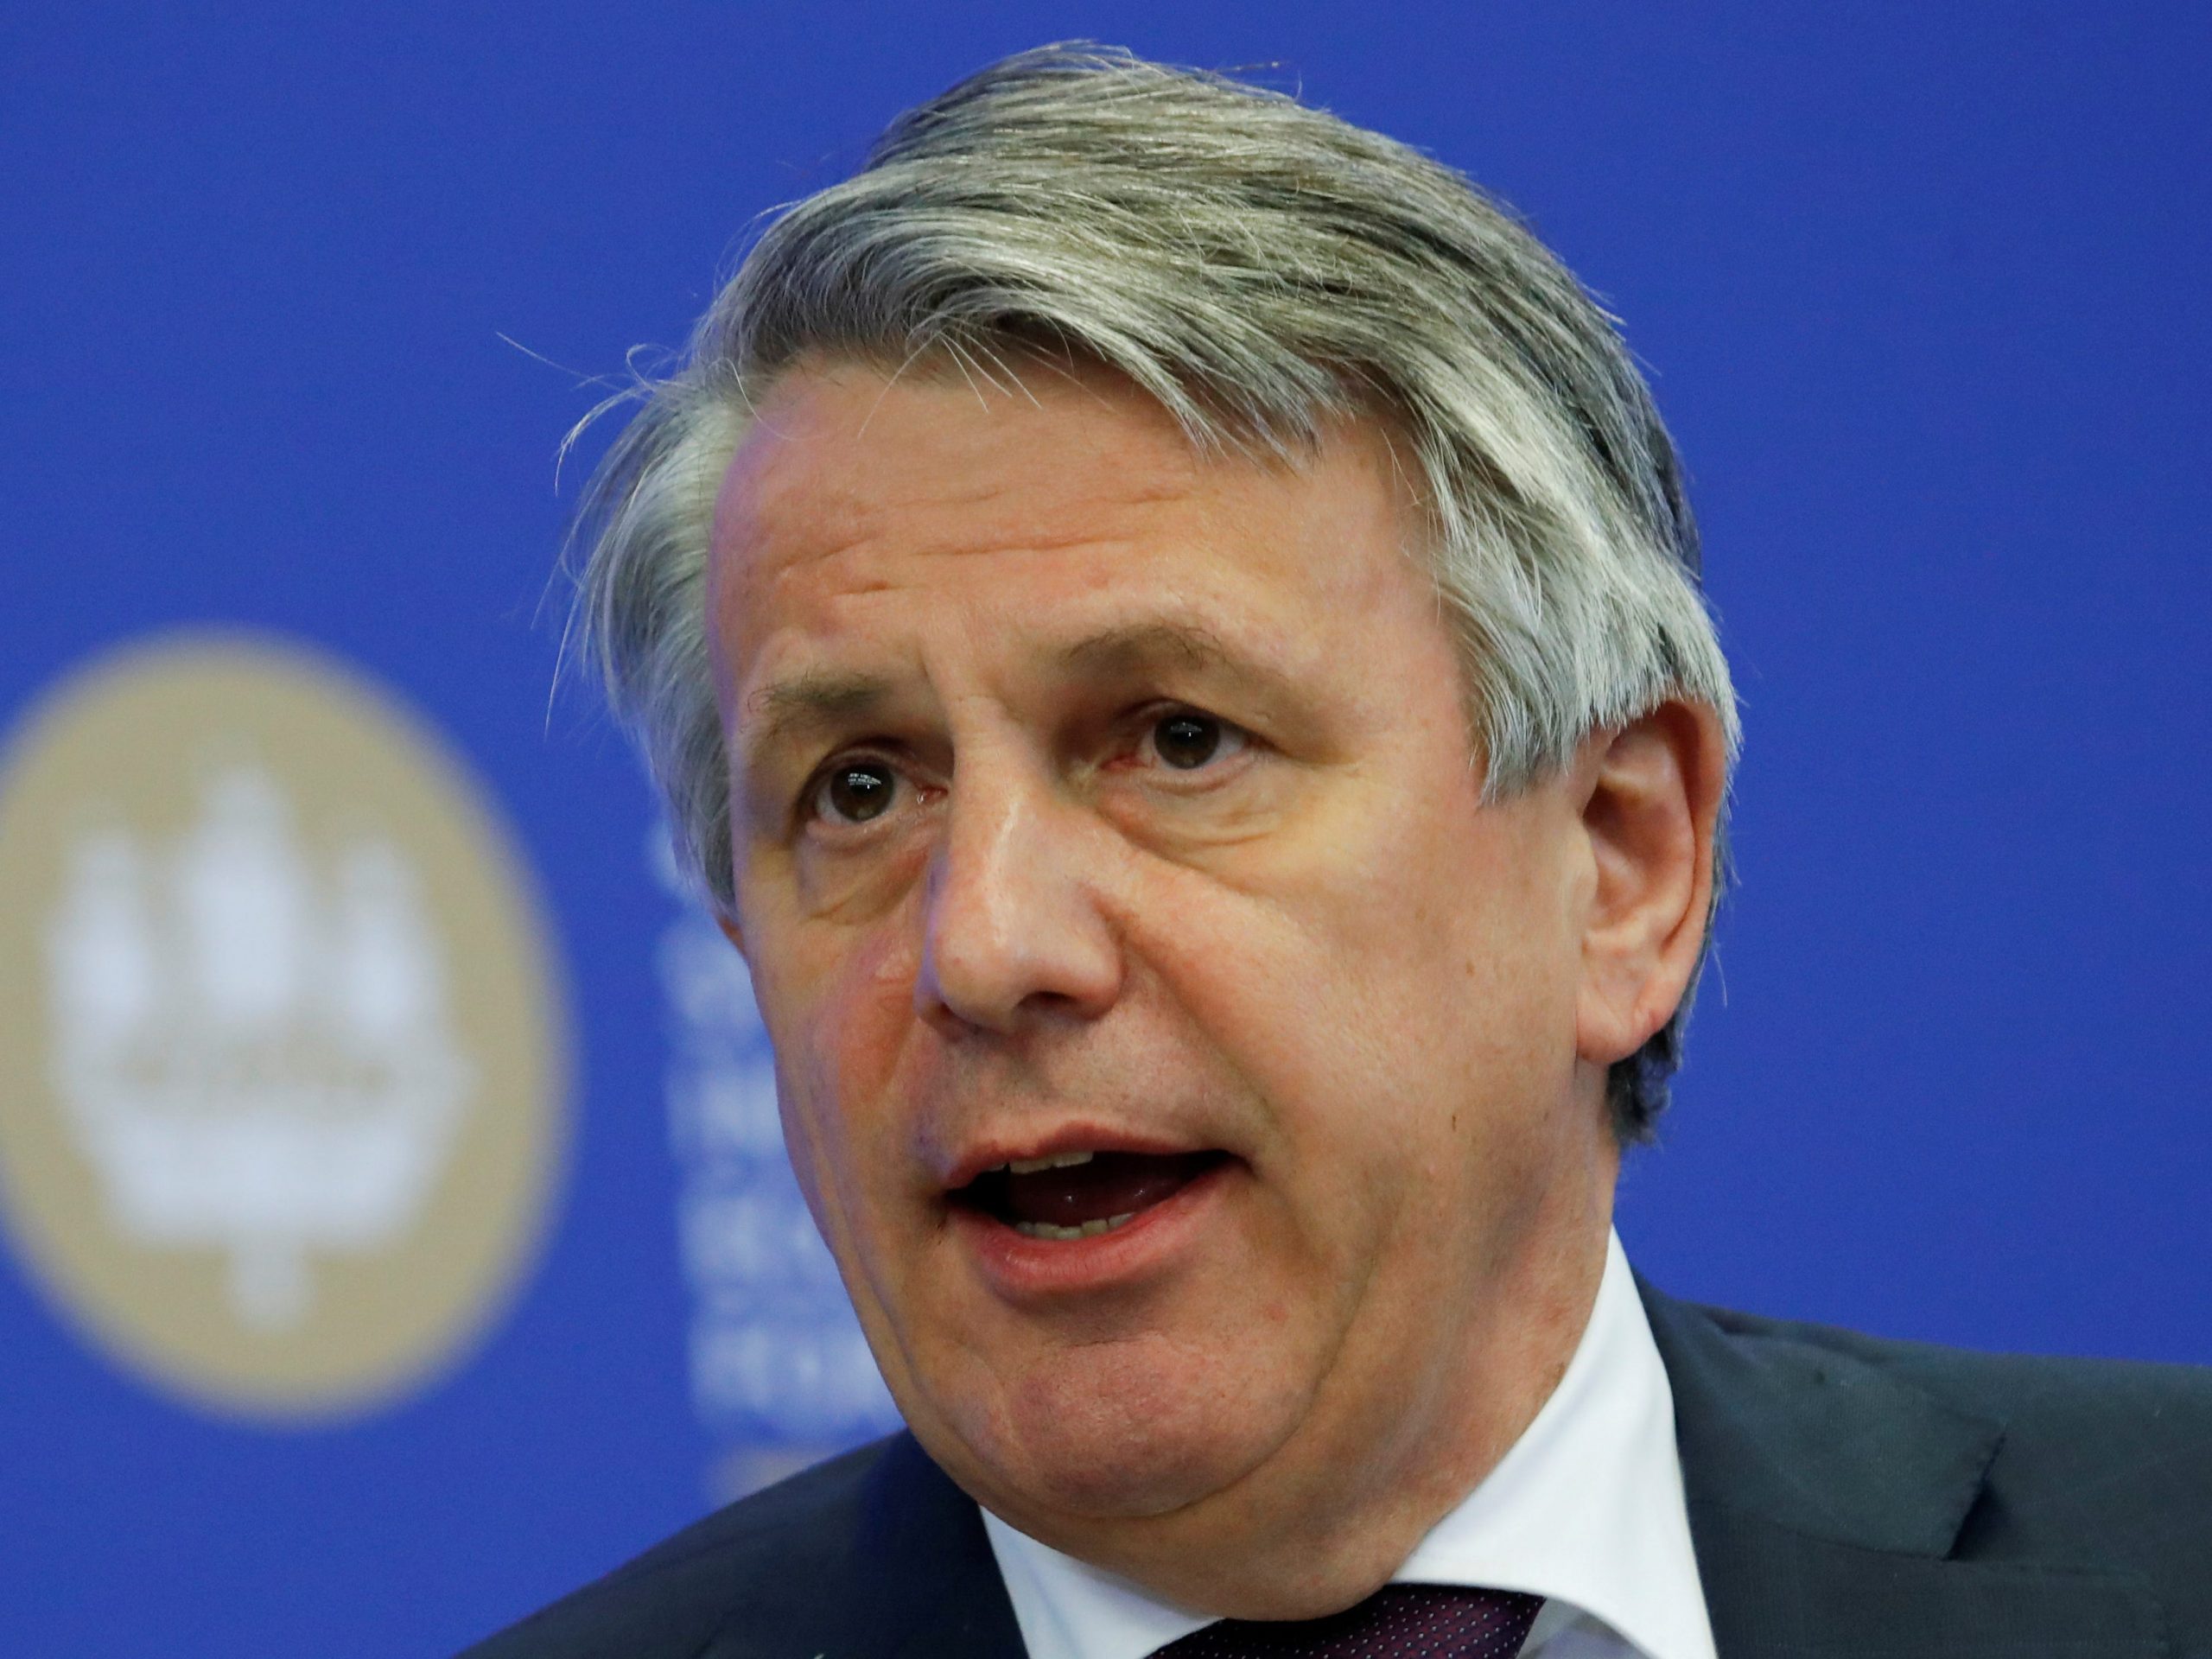 FILE PHOTO: Ben van Beurden, Chief Executive Officer of Royal Dutch Shell, attends a session of the St. Petersburg International Economic Forum (SPIEF), Russia May 25, 2018. REUTERS/Sergei Karpukhin/File Photo